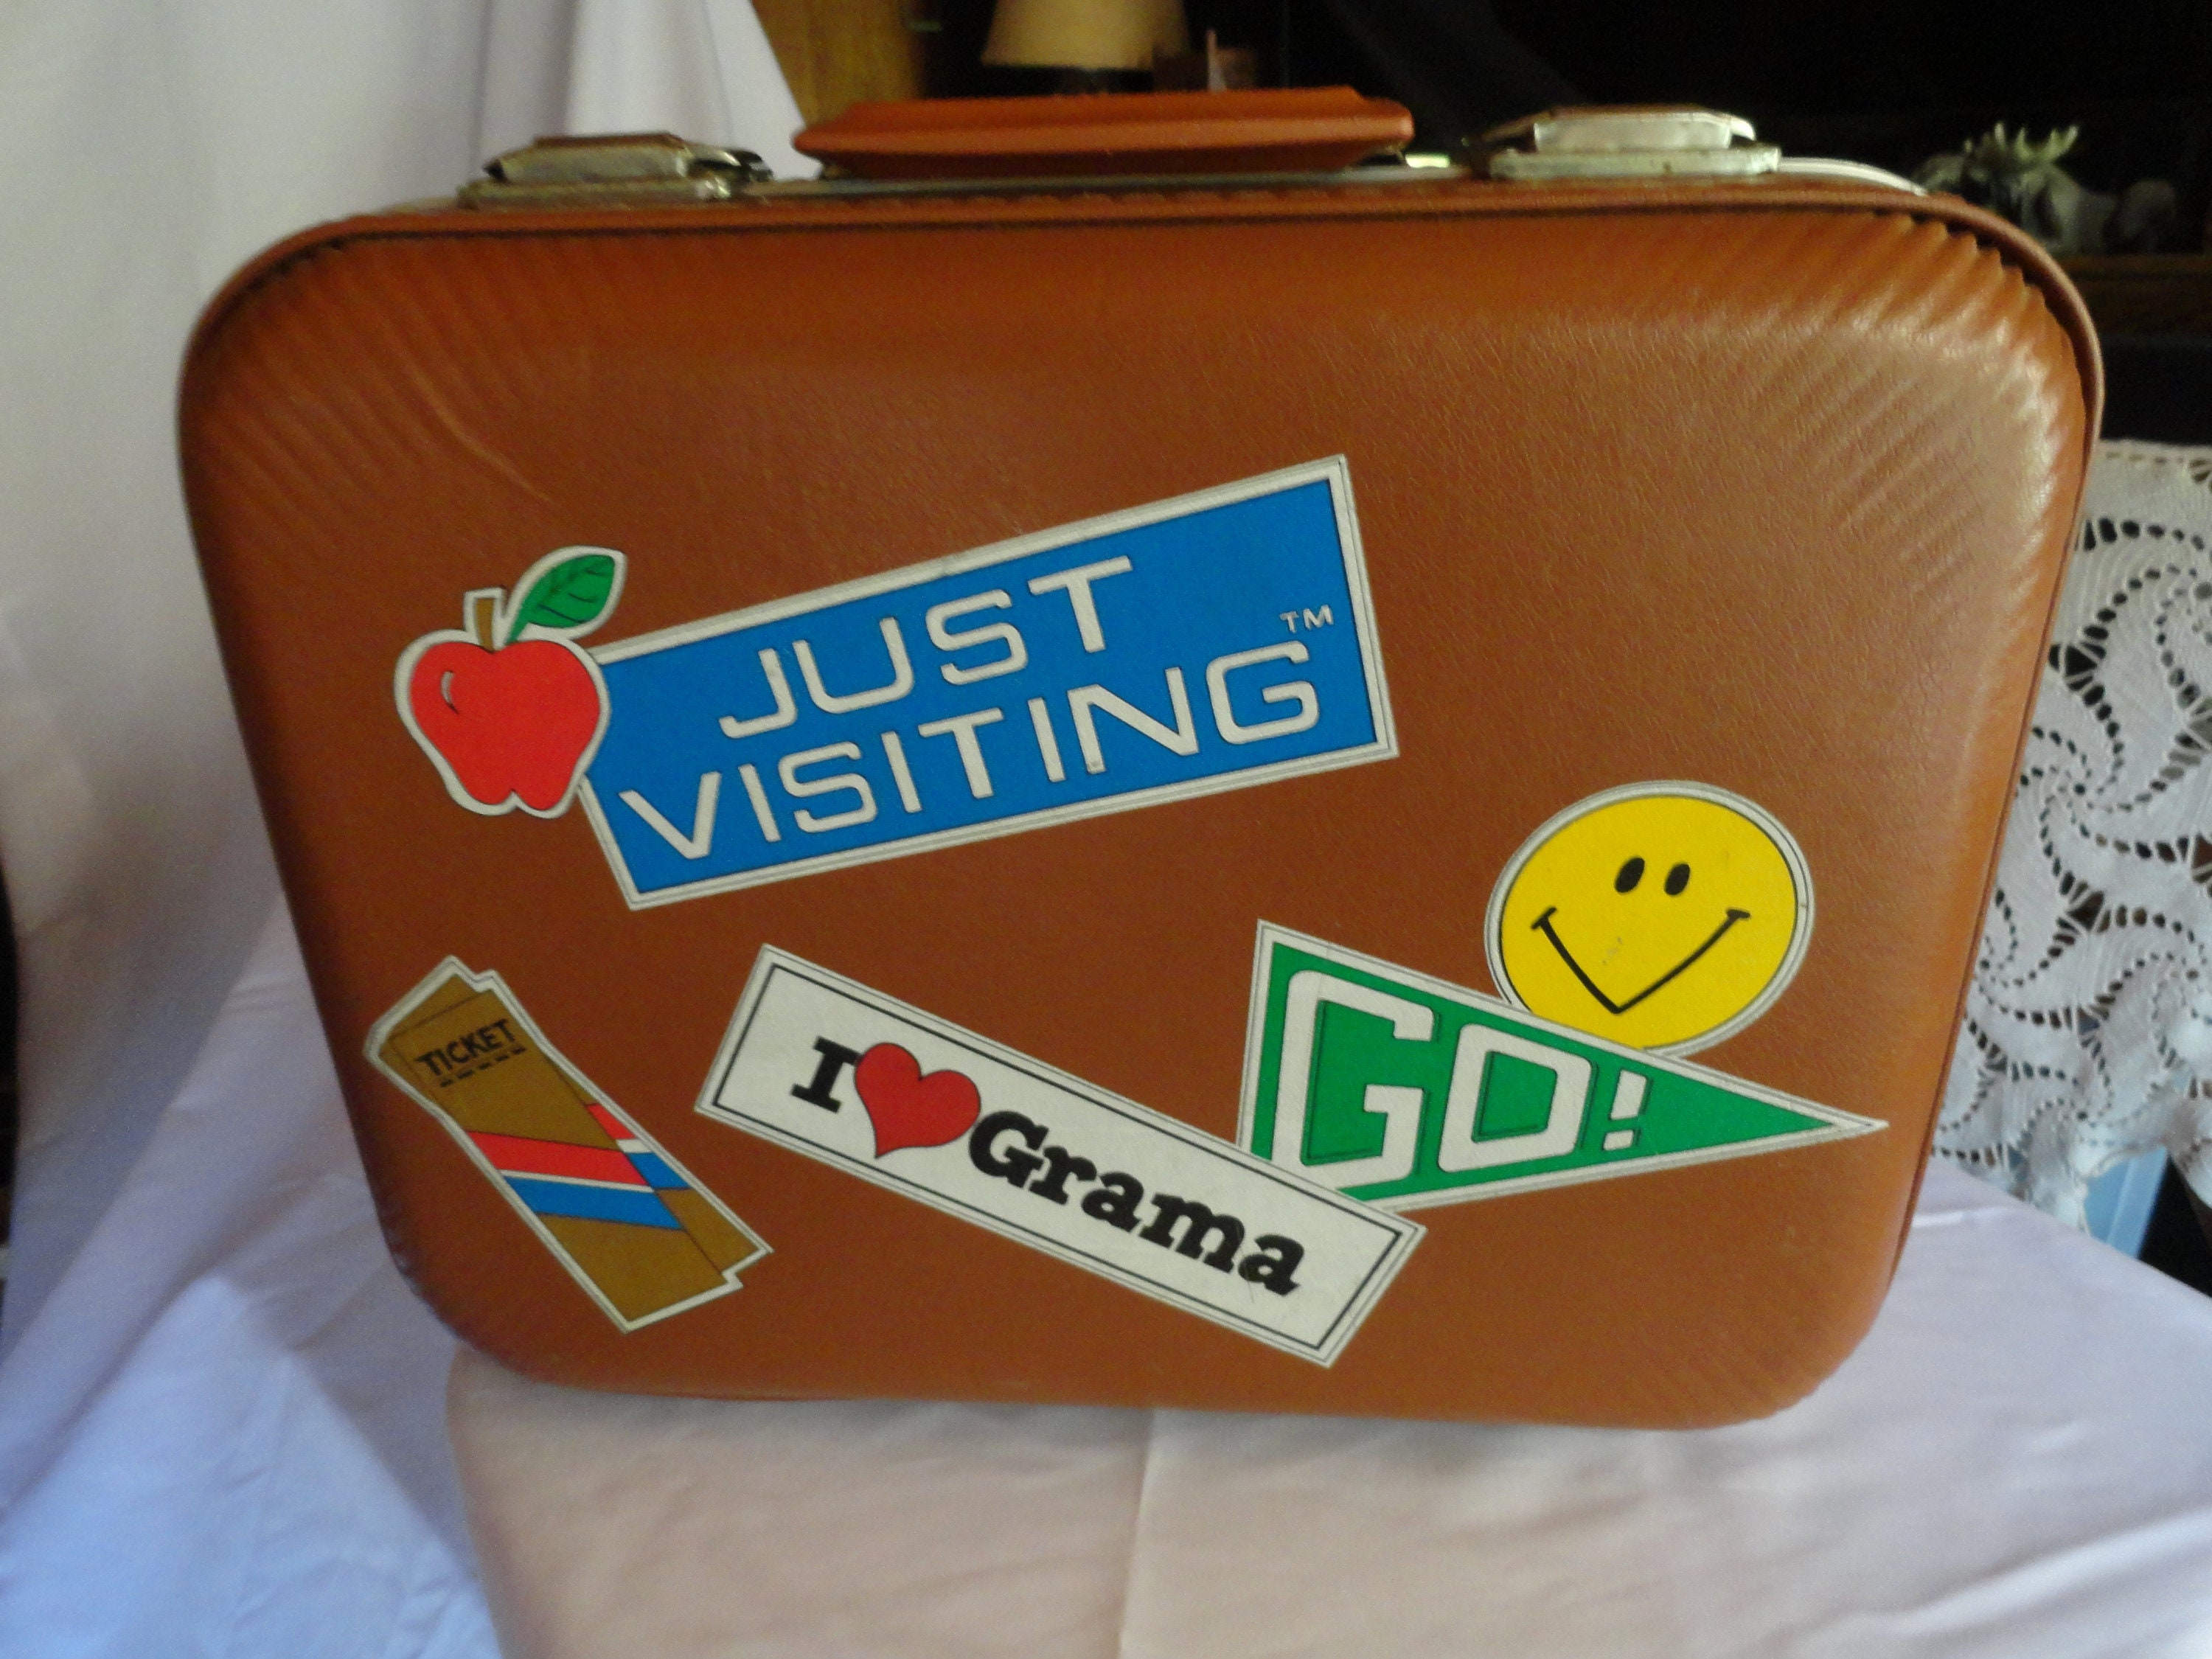 Vintage 1940's leather suitcase luggage Euro+Asian stickers decals for parts